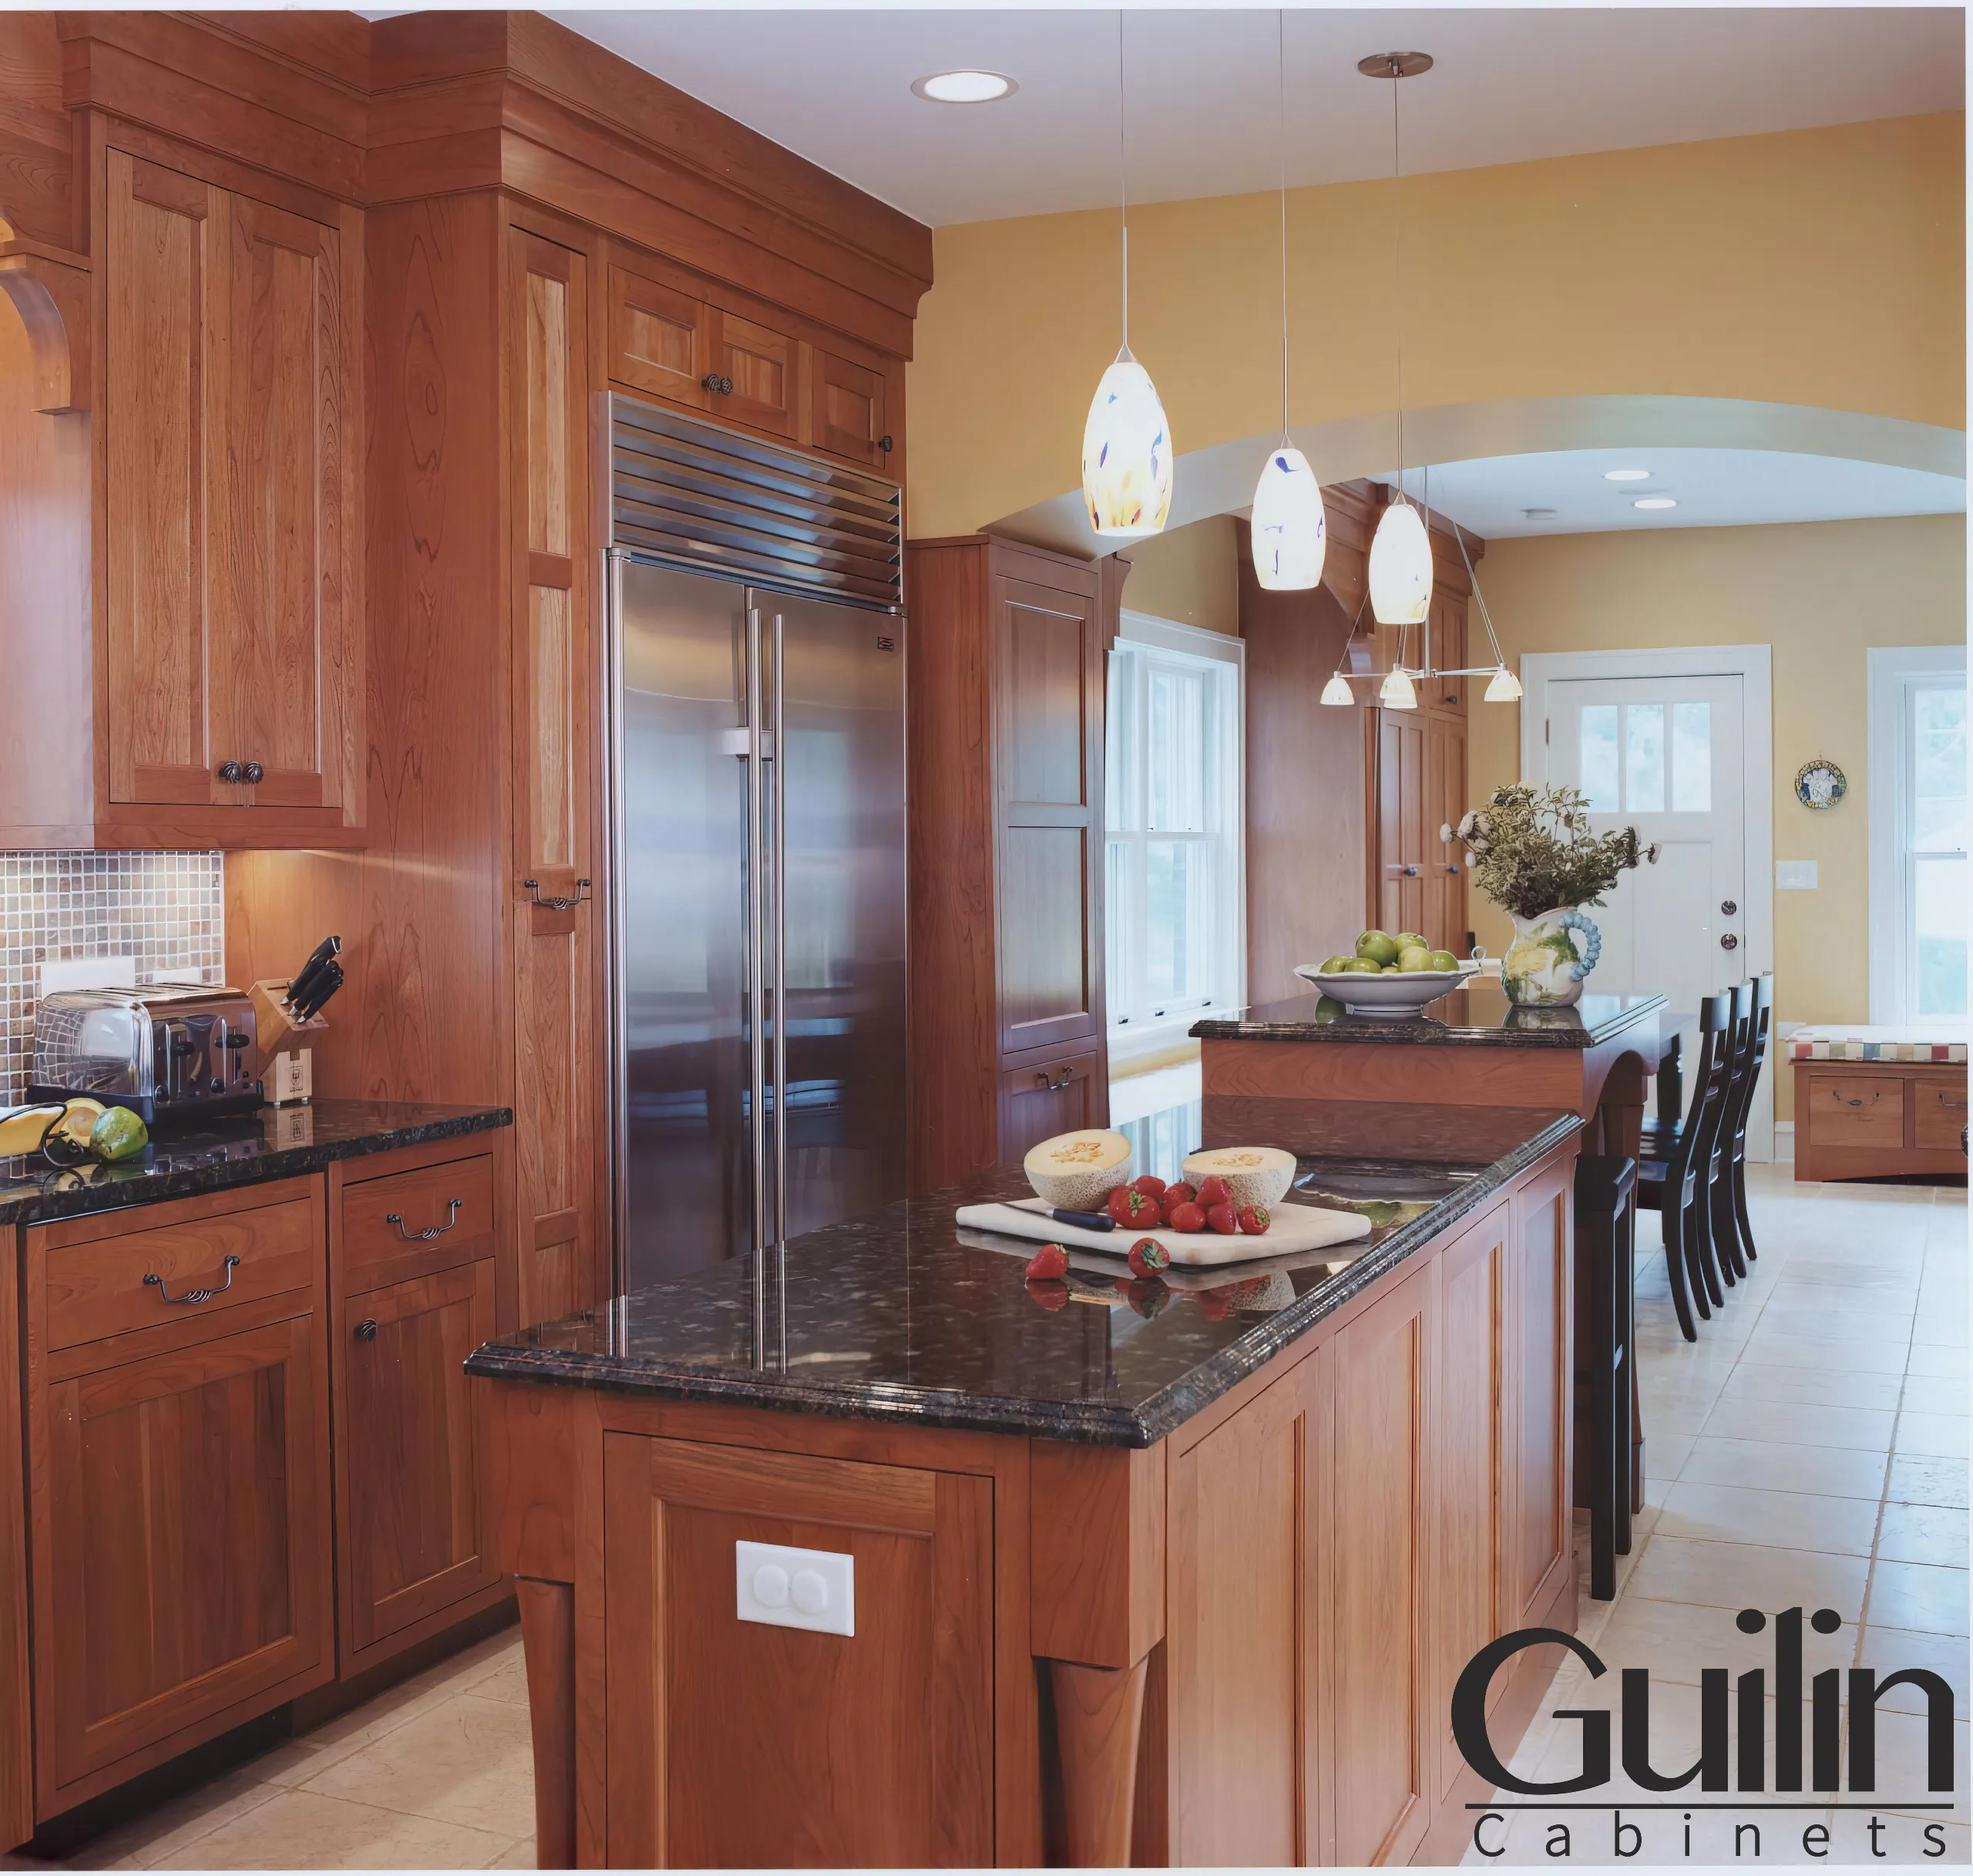 Granite countertops are affordable, range from $40 to $200 per square foot,